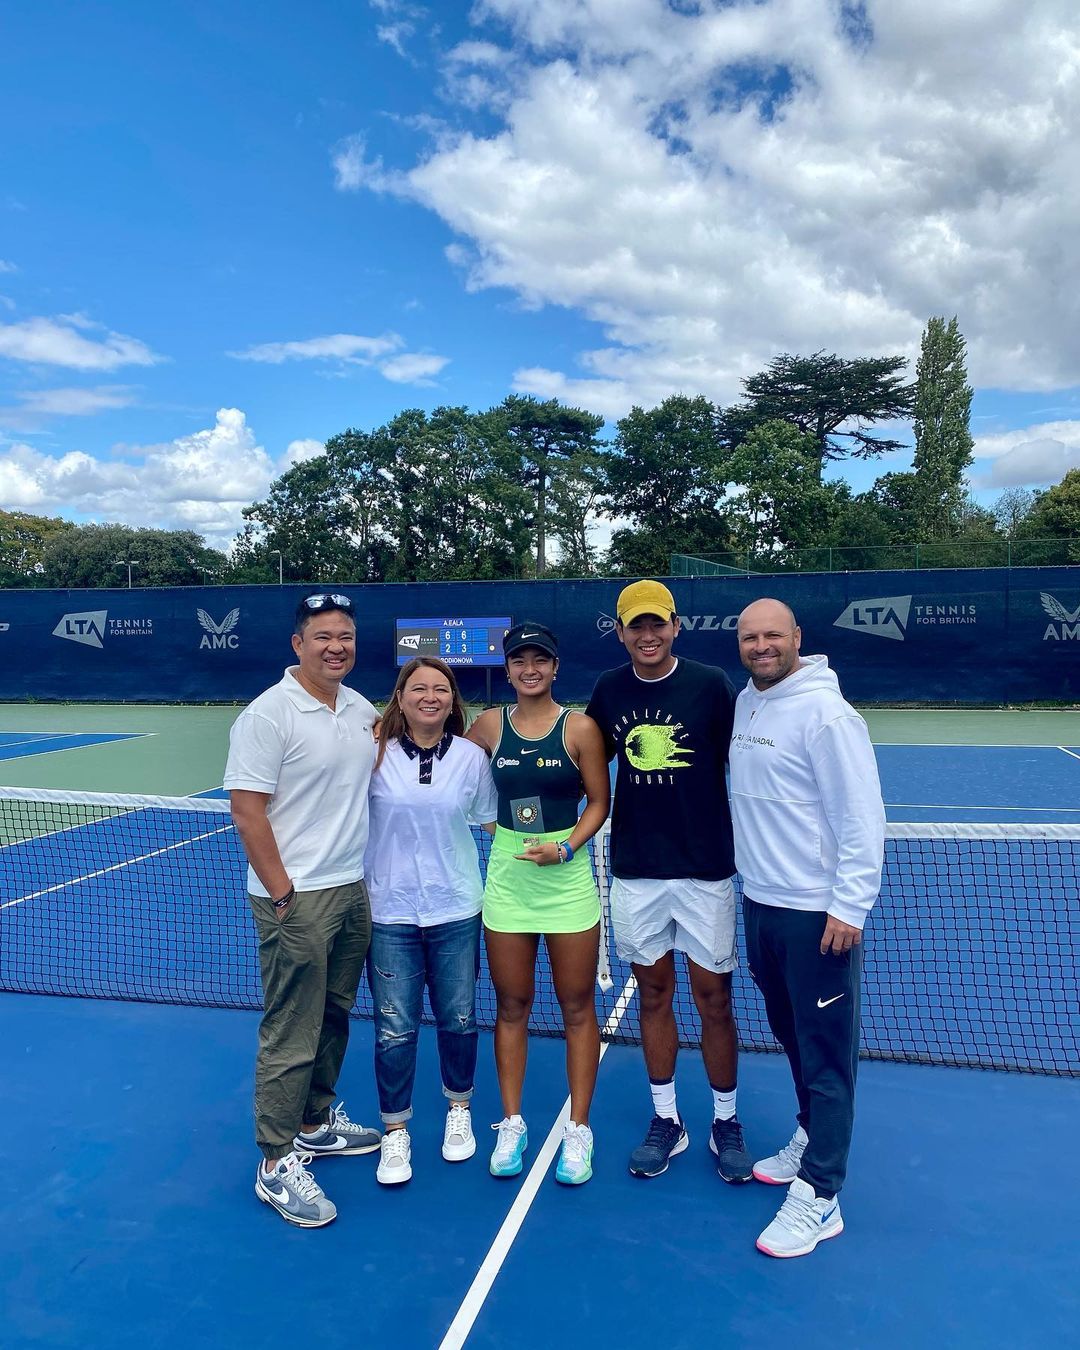 Alex Eala with her family after her W25 Roehampton victory. 